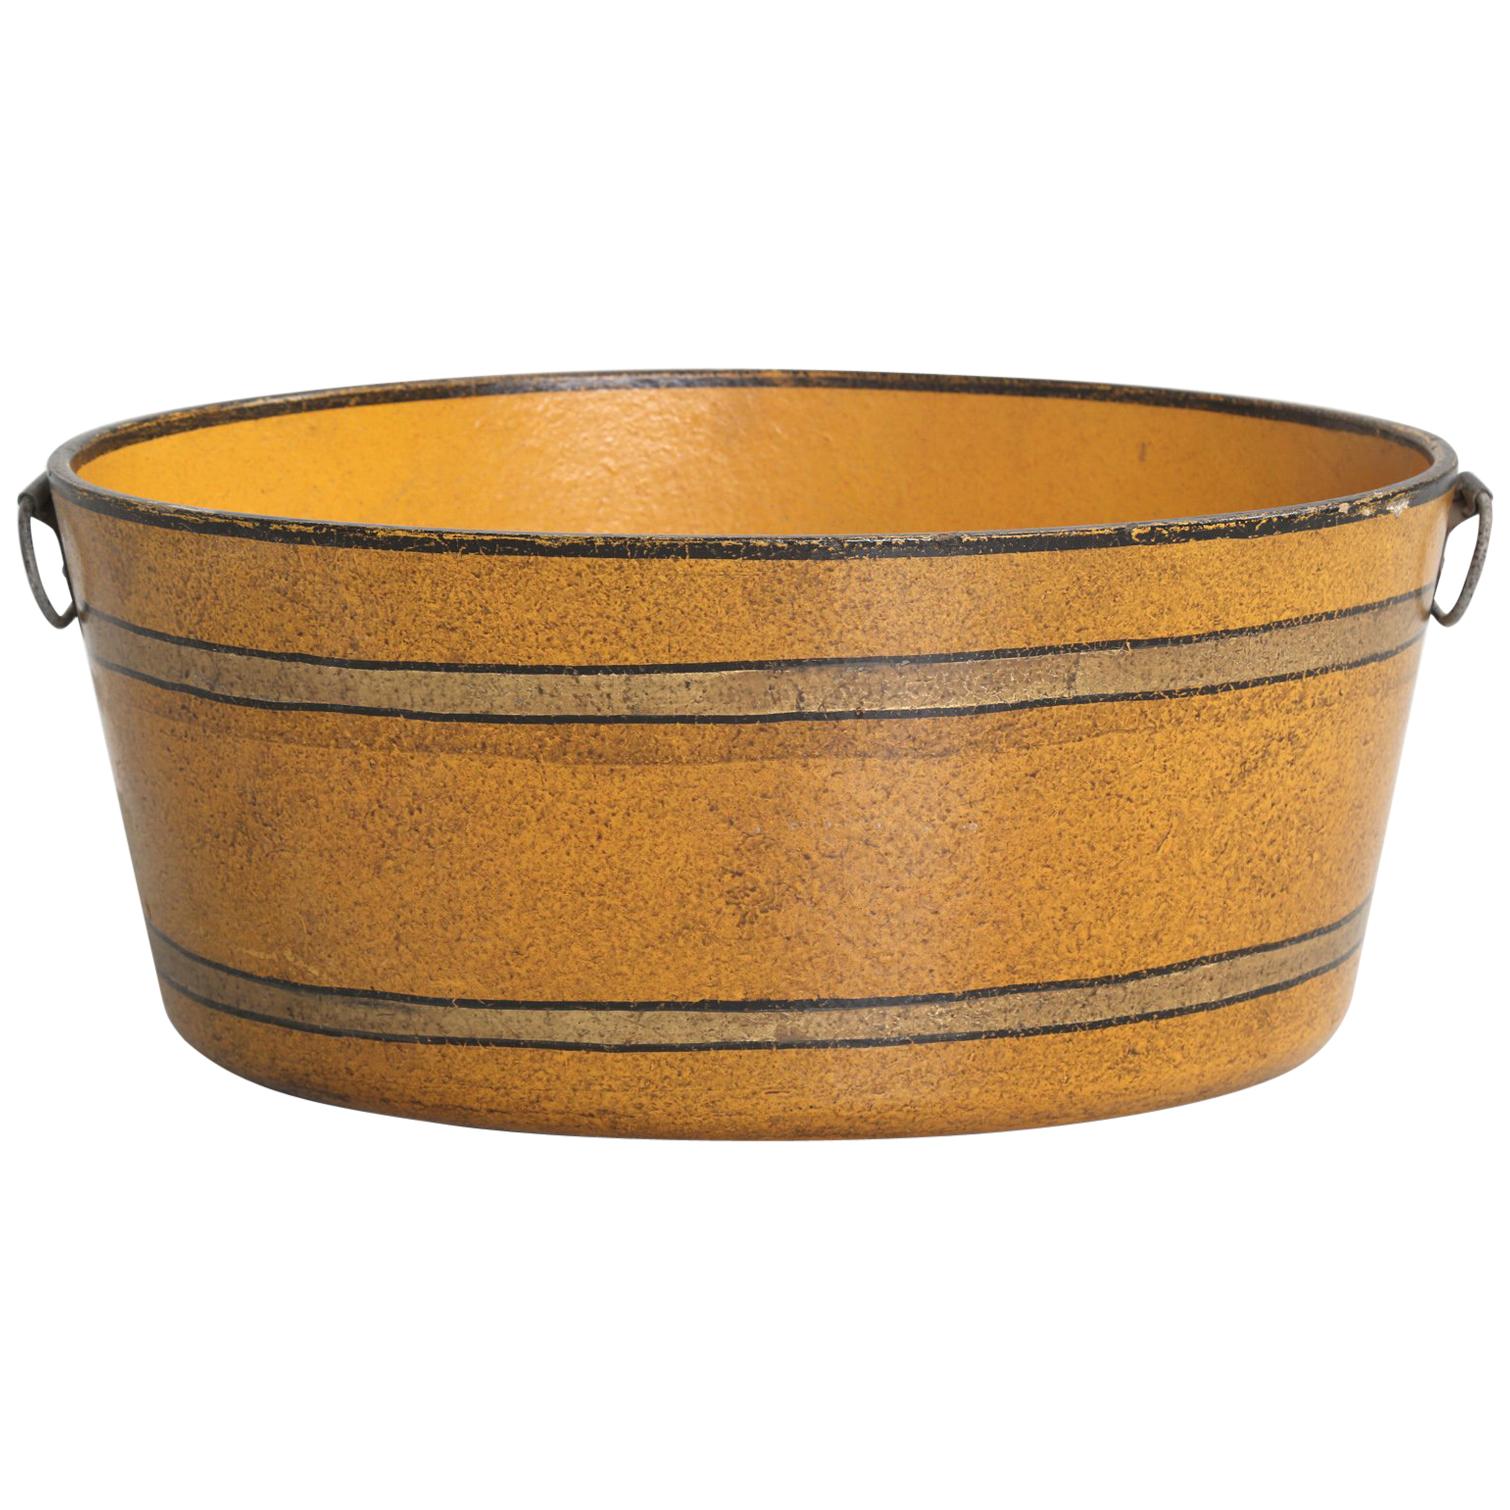 Antique French Paper-Mâché Bucket in a Beautiful Ochre Color, 1stdibs New York